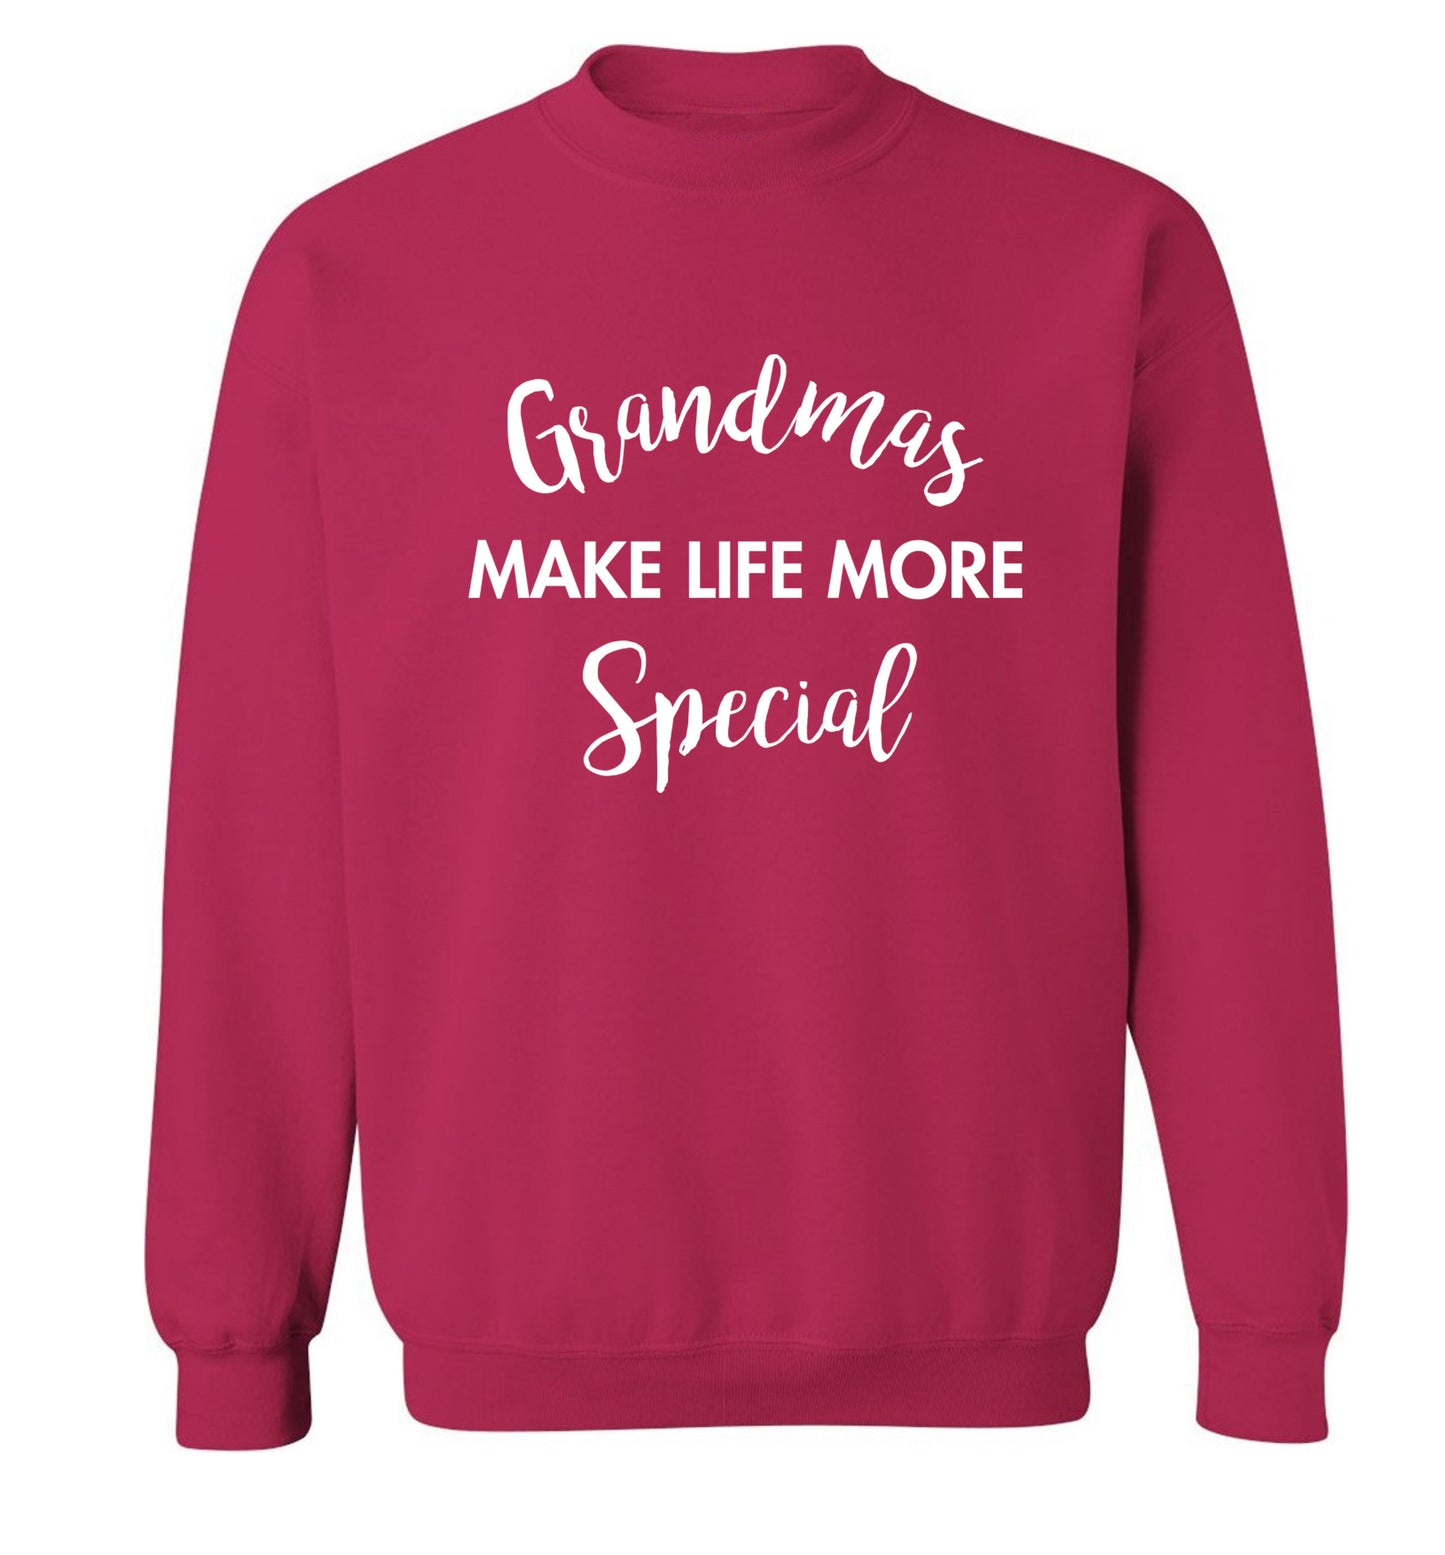 Grandmas make life more special Adult's unisex pink Sweater 2XL